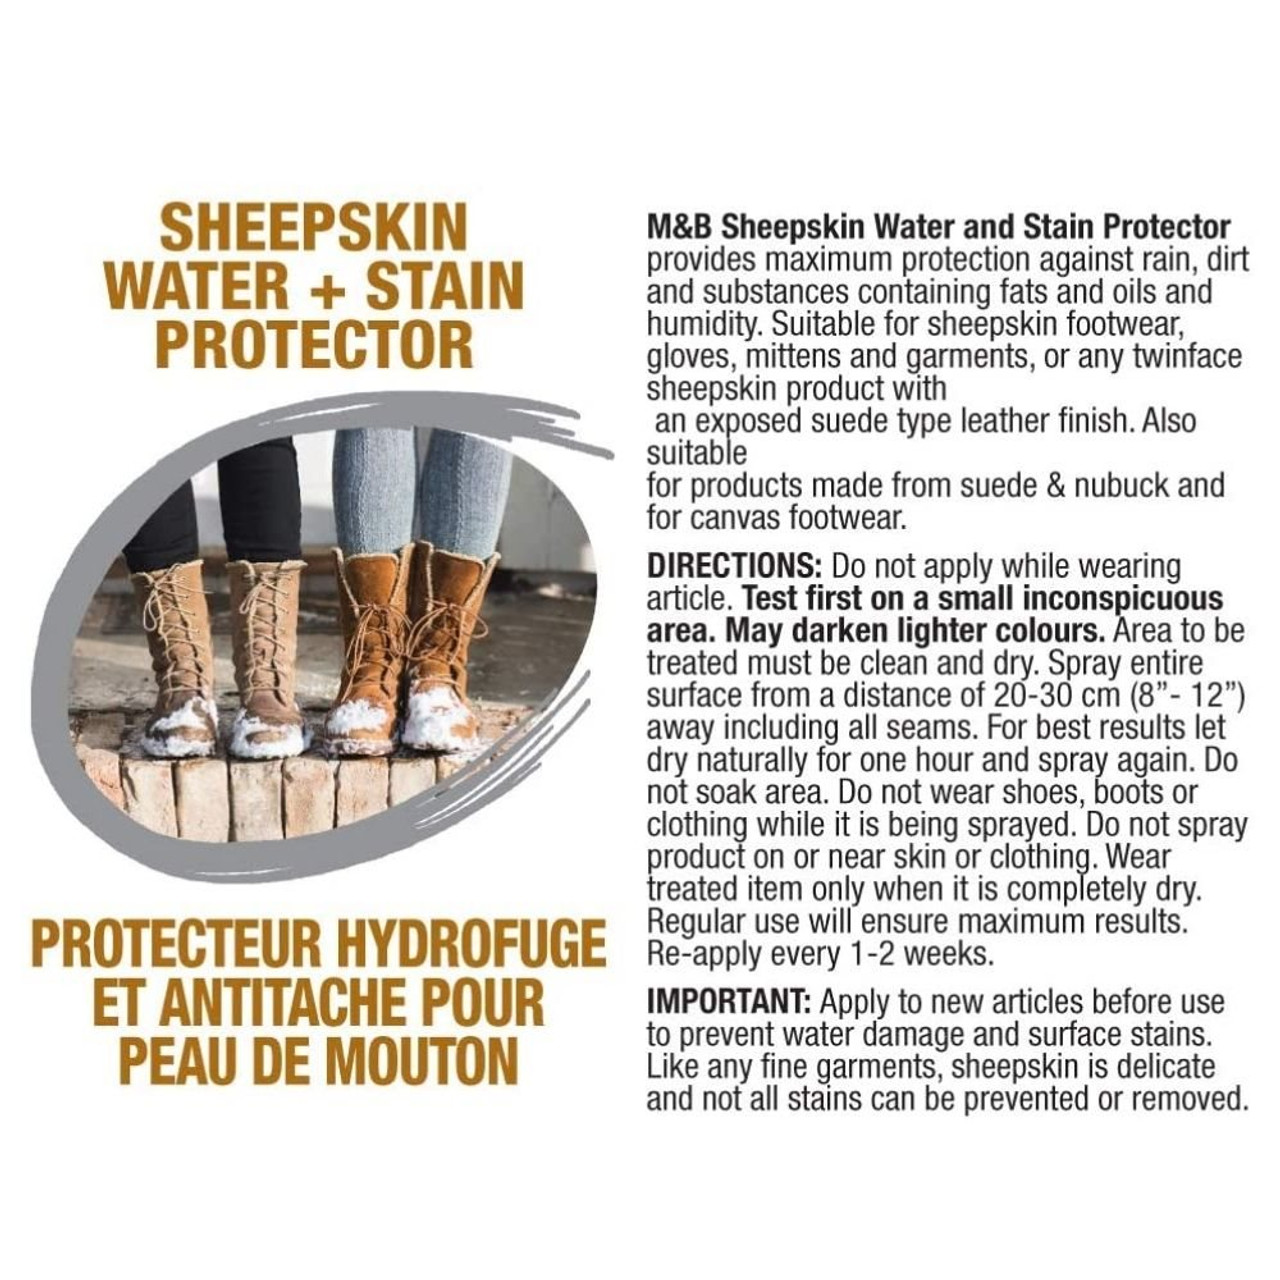 Angelus Boot Waterproofing Spray- Protects your Sheepskin Boots & Shoes  from Salt, Water, Stains, & More- Use on Suede, Leather, & More- 5.5oz